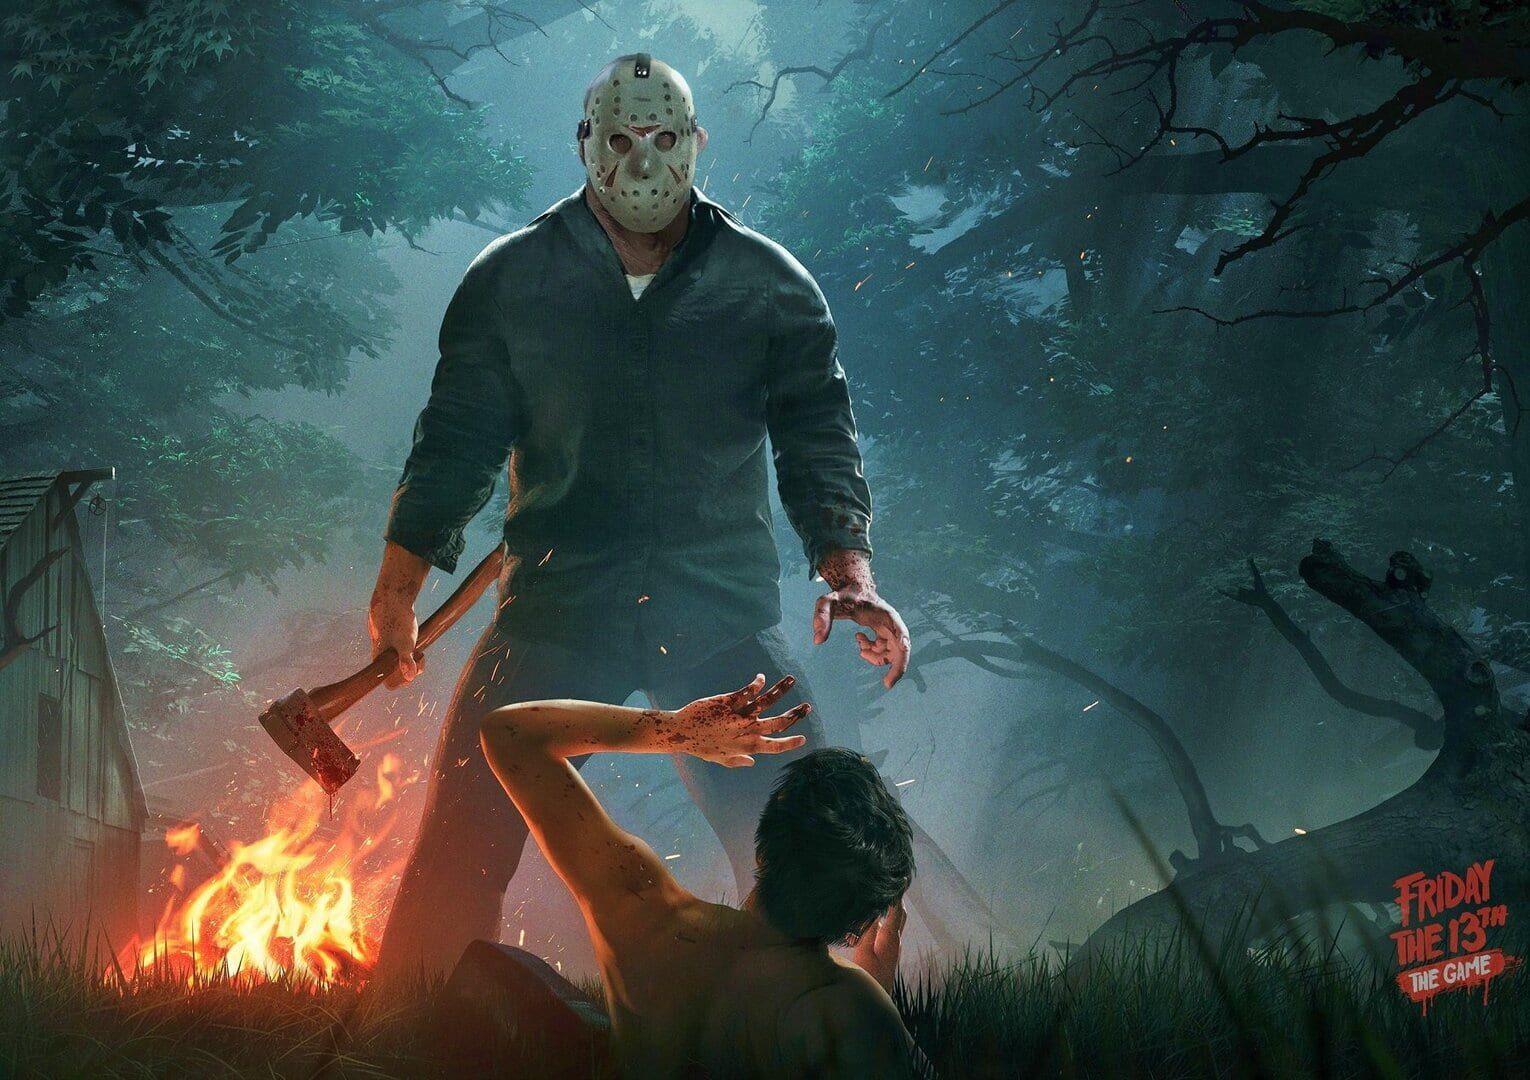 Friday the 13th: The Game artwork